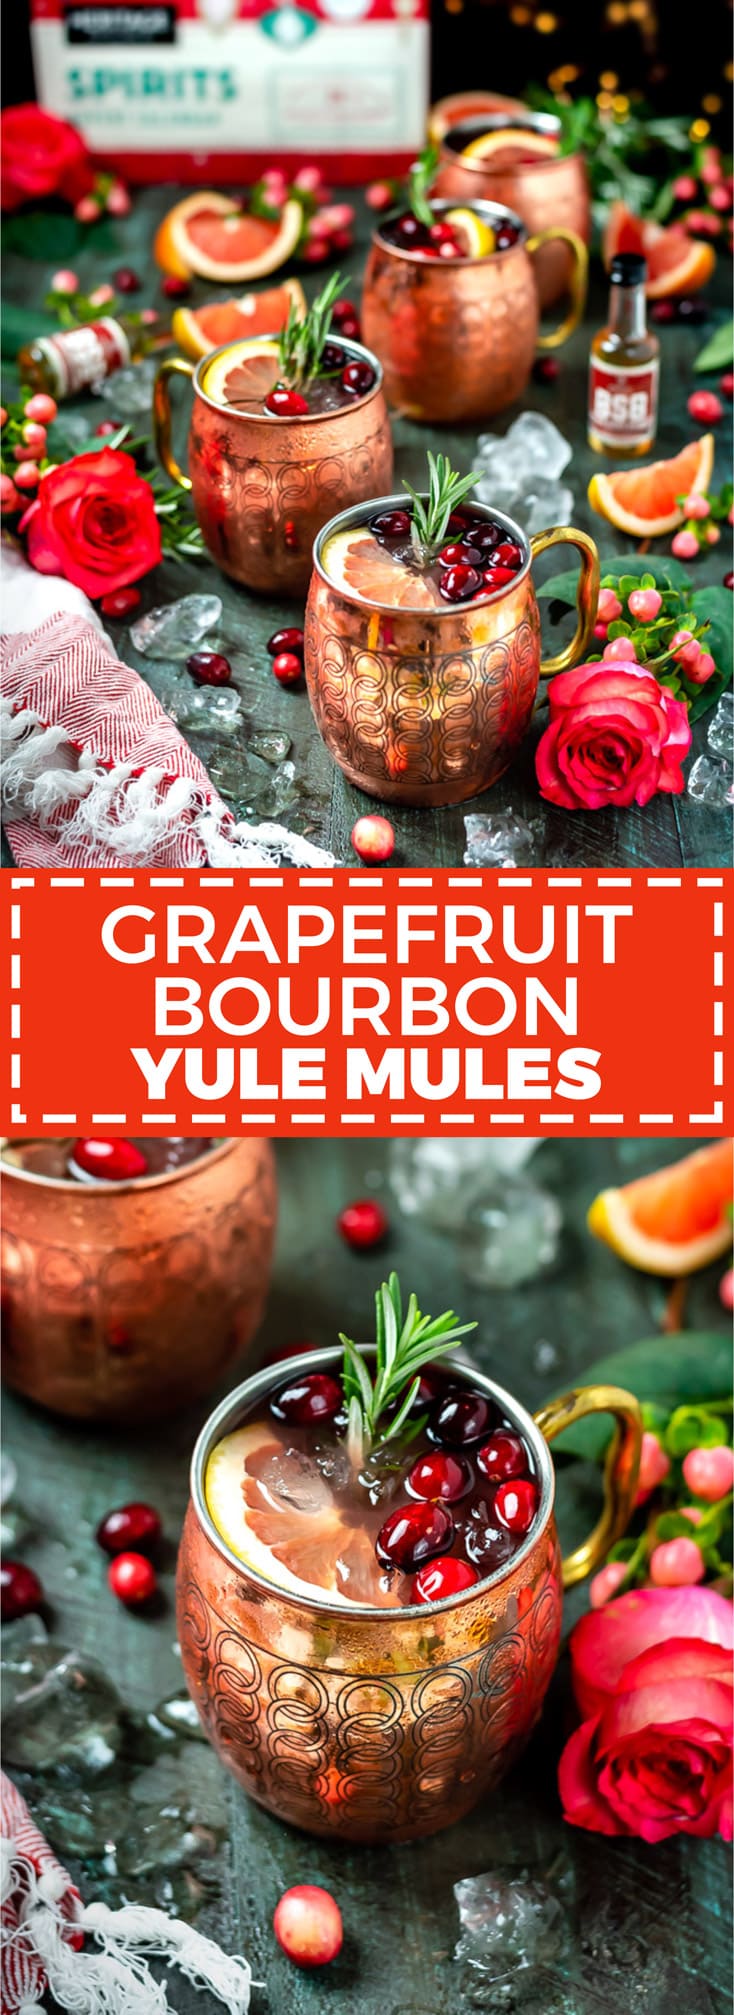 Grapefruit Bourbon Yule Mules. This holiday-inspired spin on the classic Moscow Mule #cocktail features the warming flavors of Brown Sugar Bourbon and ginger beer, as well as plenty of citrusy grapefruit. It's the perfect drink to unwind during the #Christmas season. | #heritagedistilling #ad | hostthetoast.com